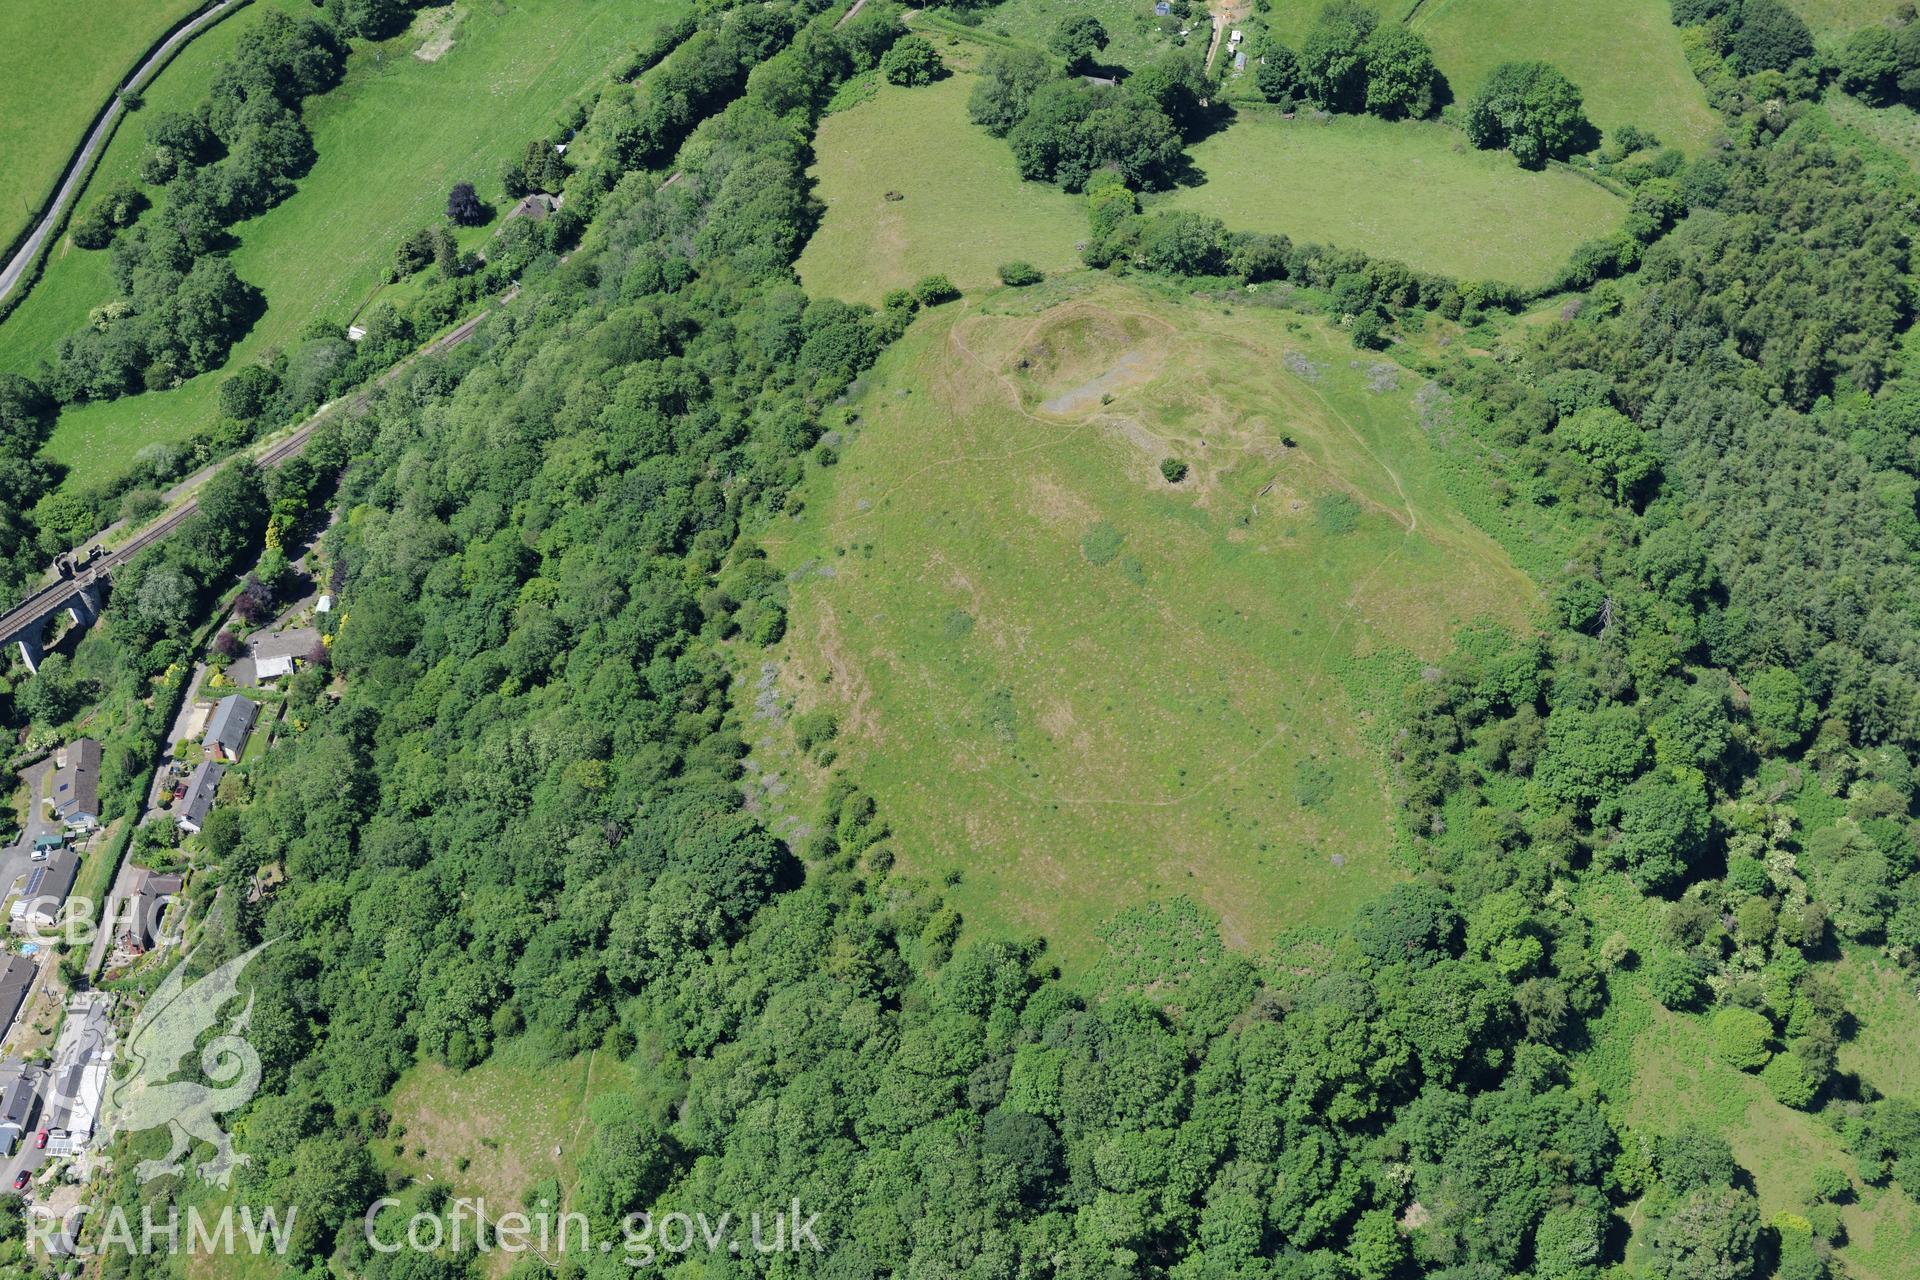 Knucklas castle, north west of Knighton. Oblique aerial photograph taken during the Royal Commission's programme of archaeological aerial reconnaissance by Toby Driver on 30th June 2015.